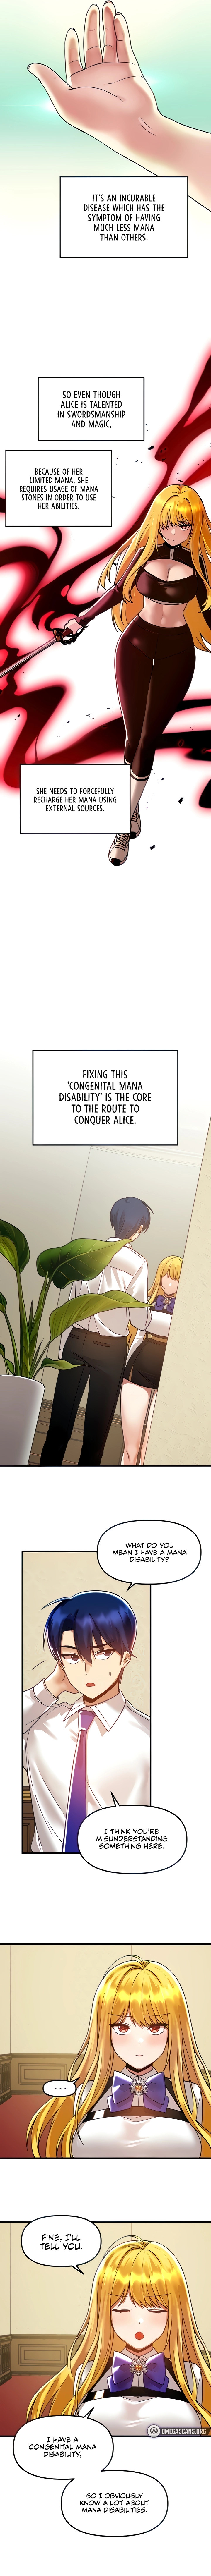 Trapped in the Academy’s Eroge image